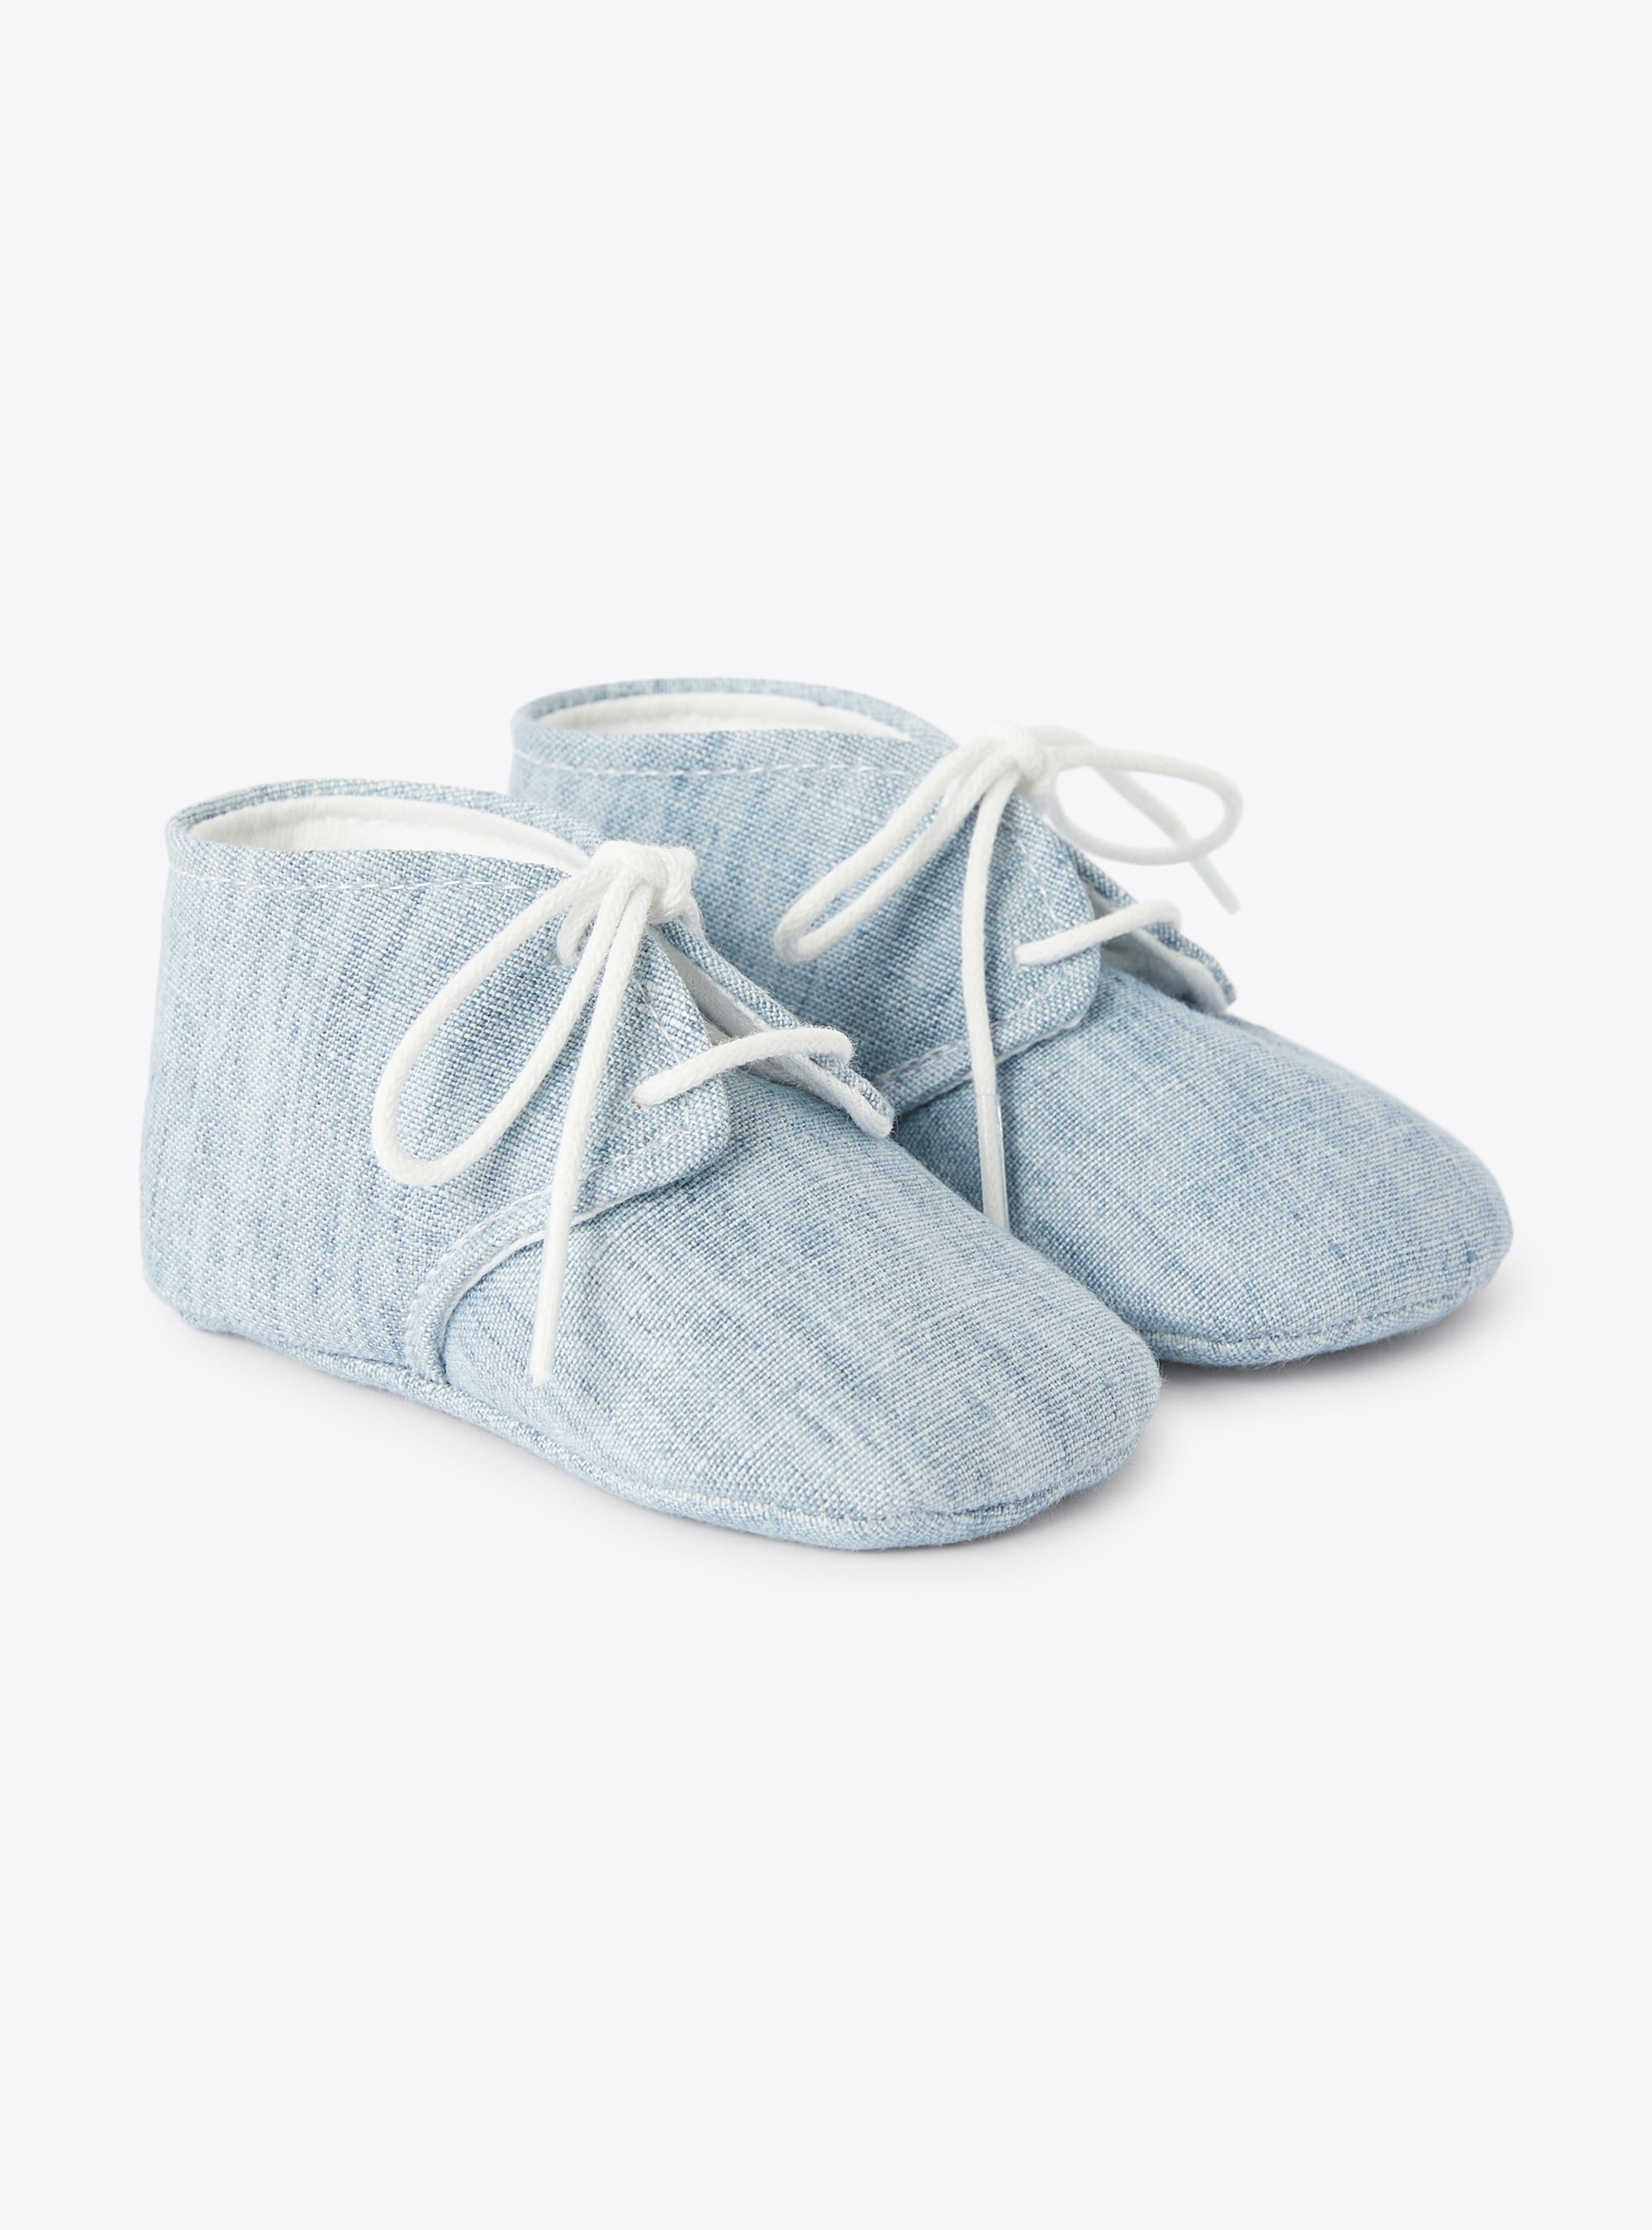 Booties for baby boys in sky-blue linen - Shoes - Il Gufo